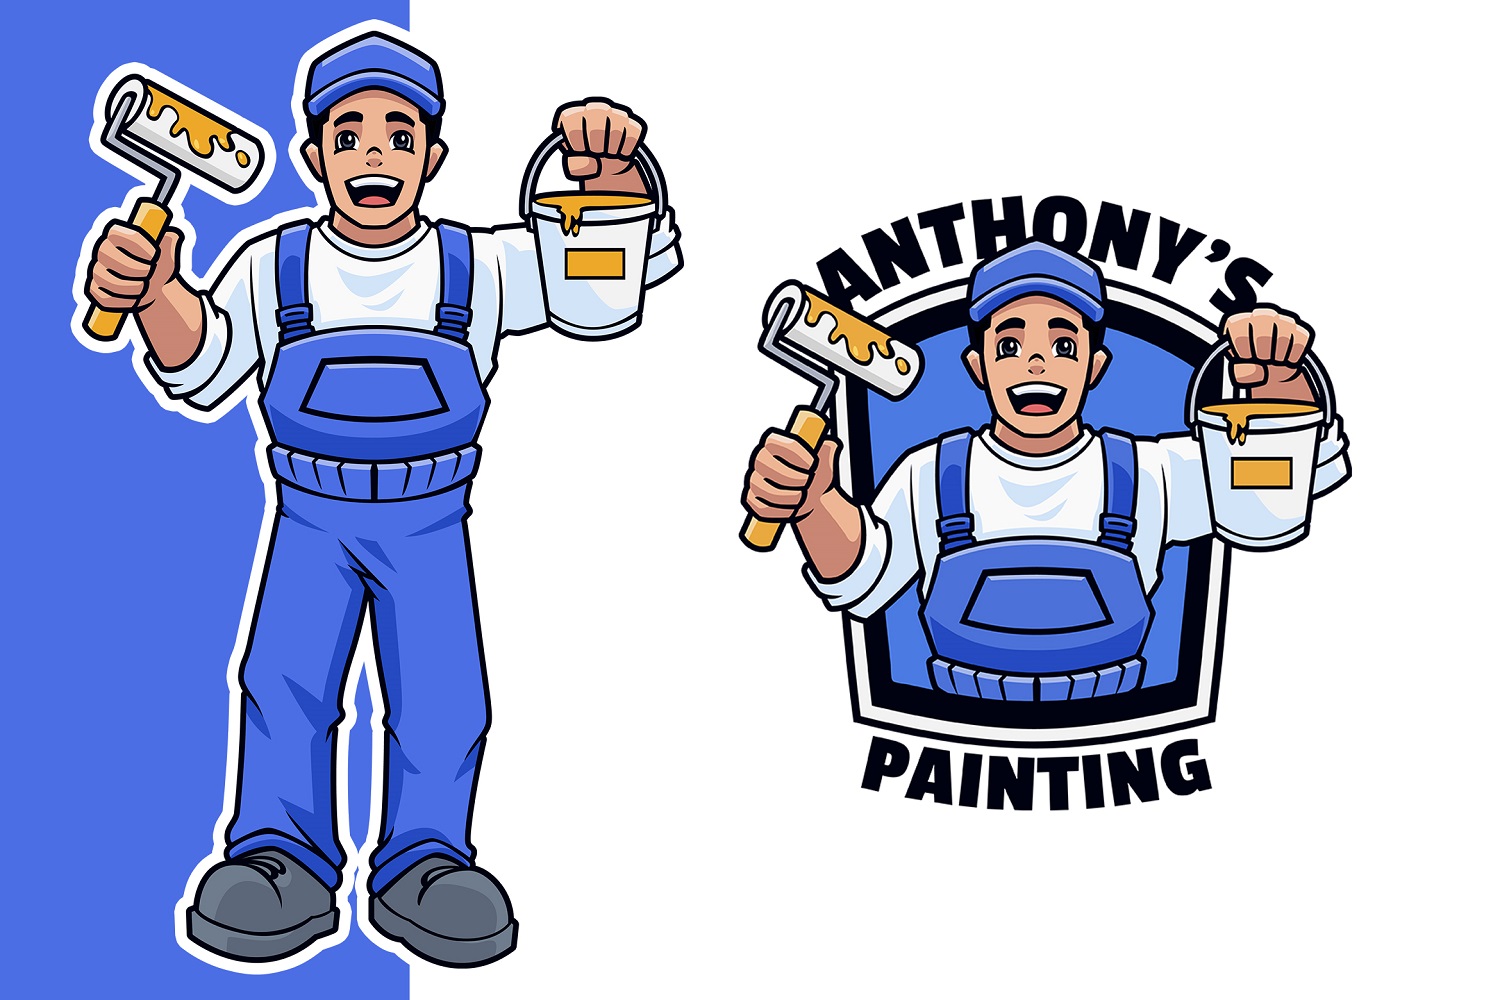 Painting Service Mascot Logo Template